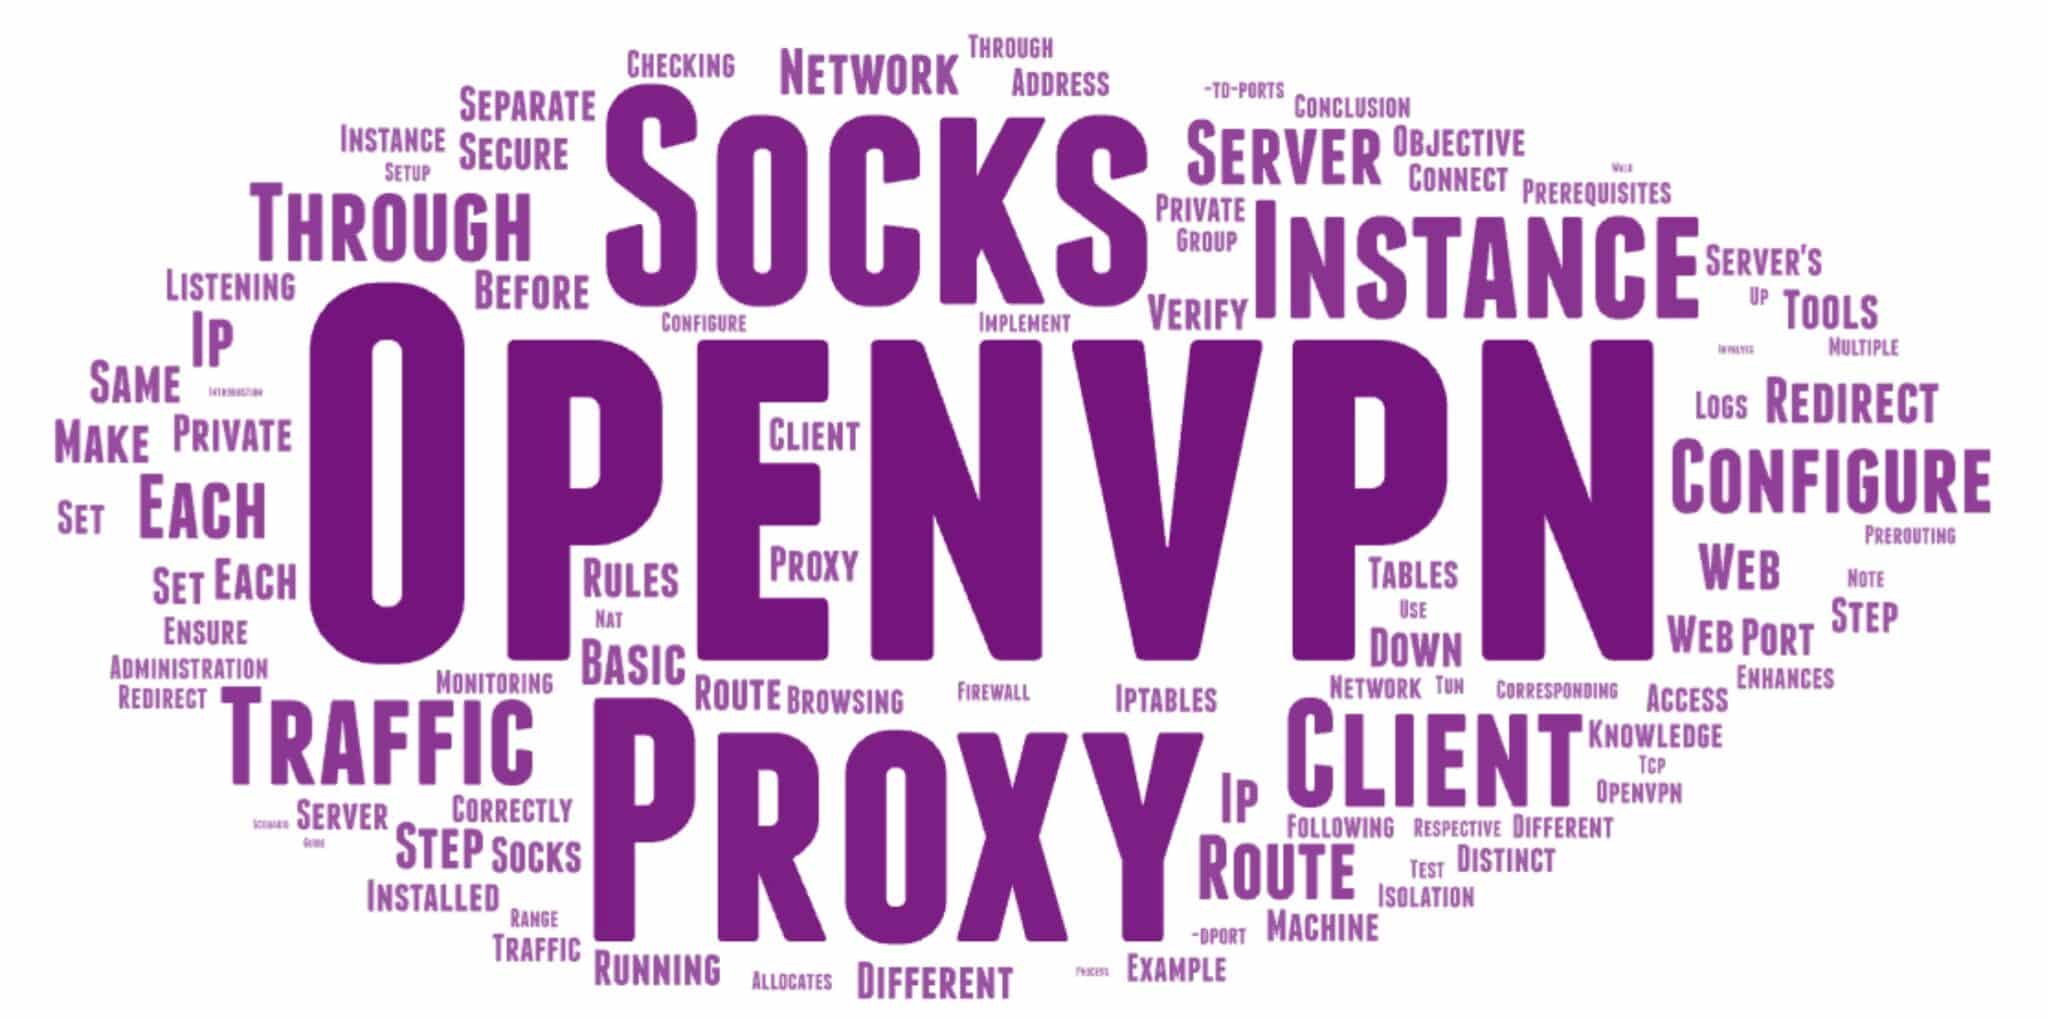 Implementing Multi-Instance OpenVPN with Socks Proxy for Secure Web Browsing